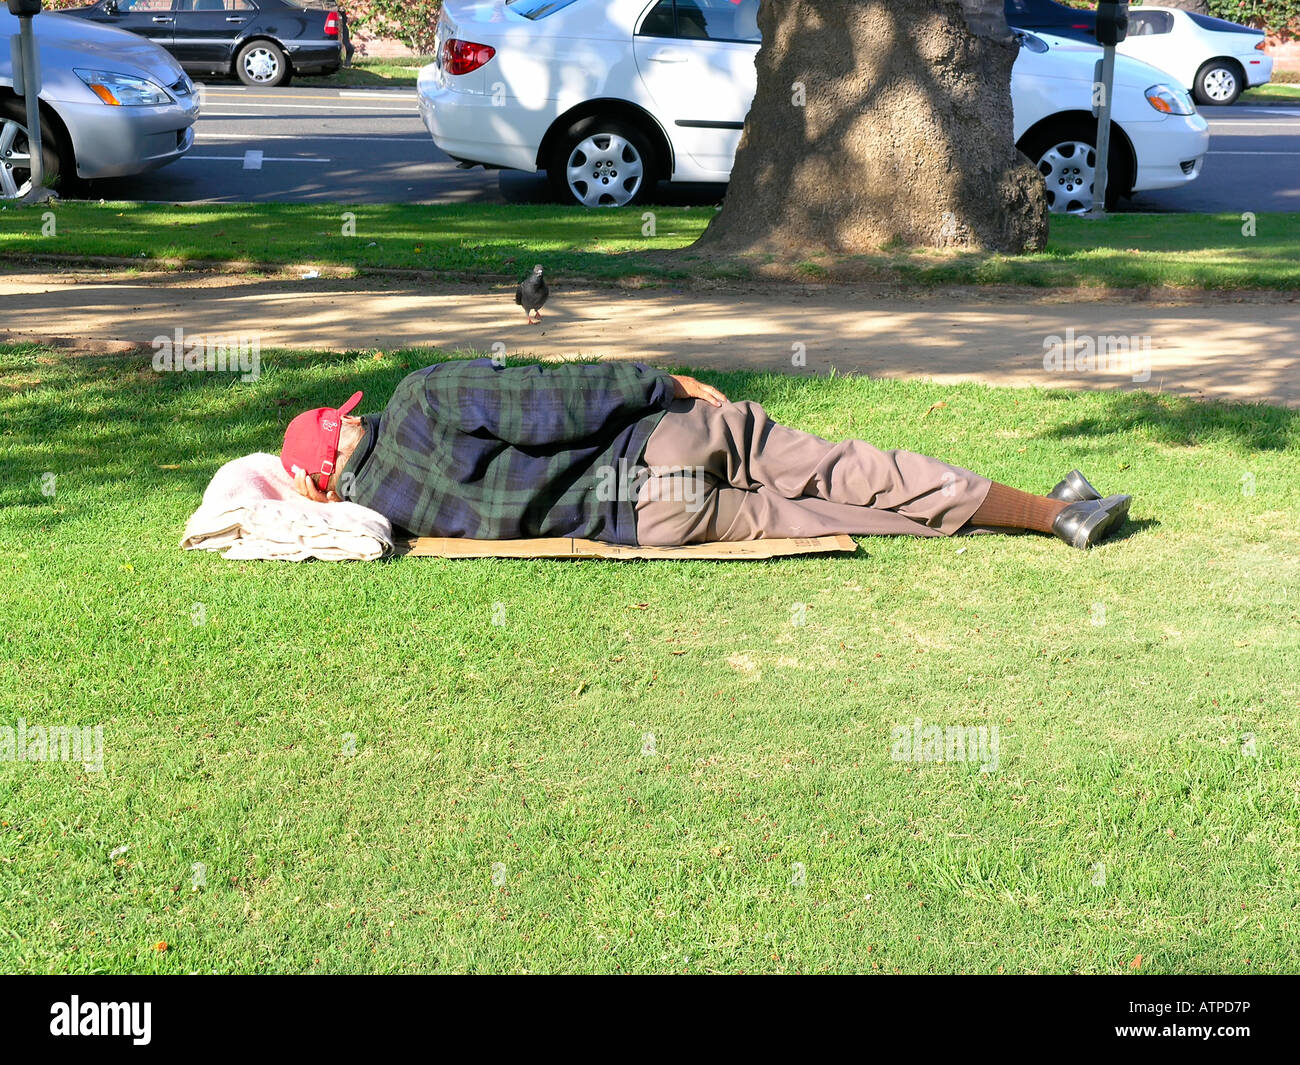 Homeless person sleeping on the cardboard in Pacific Palisades Stock Photo